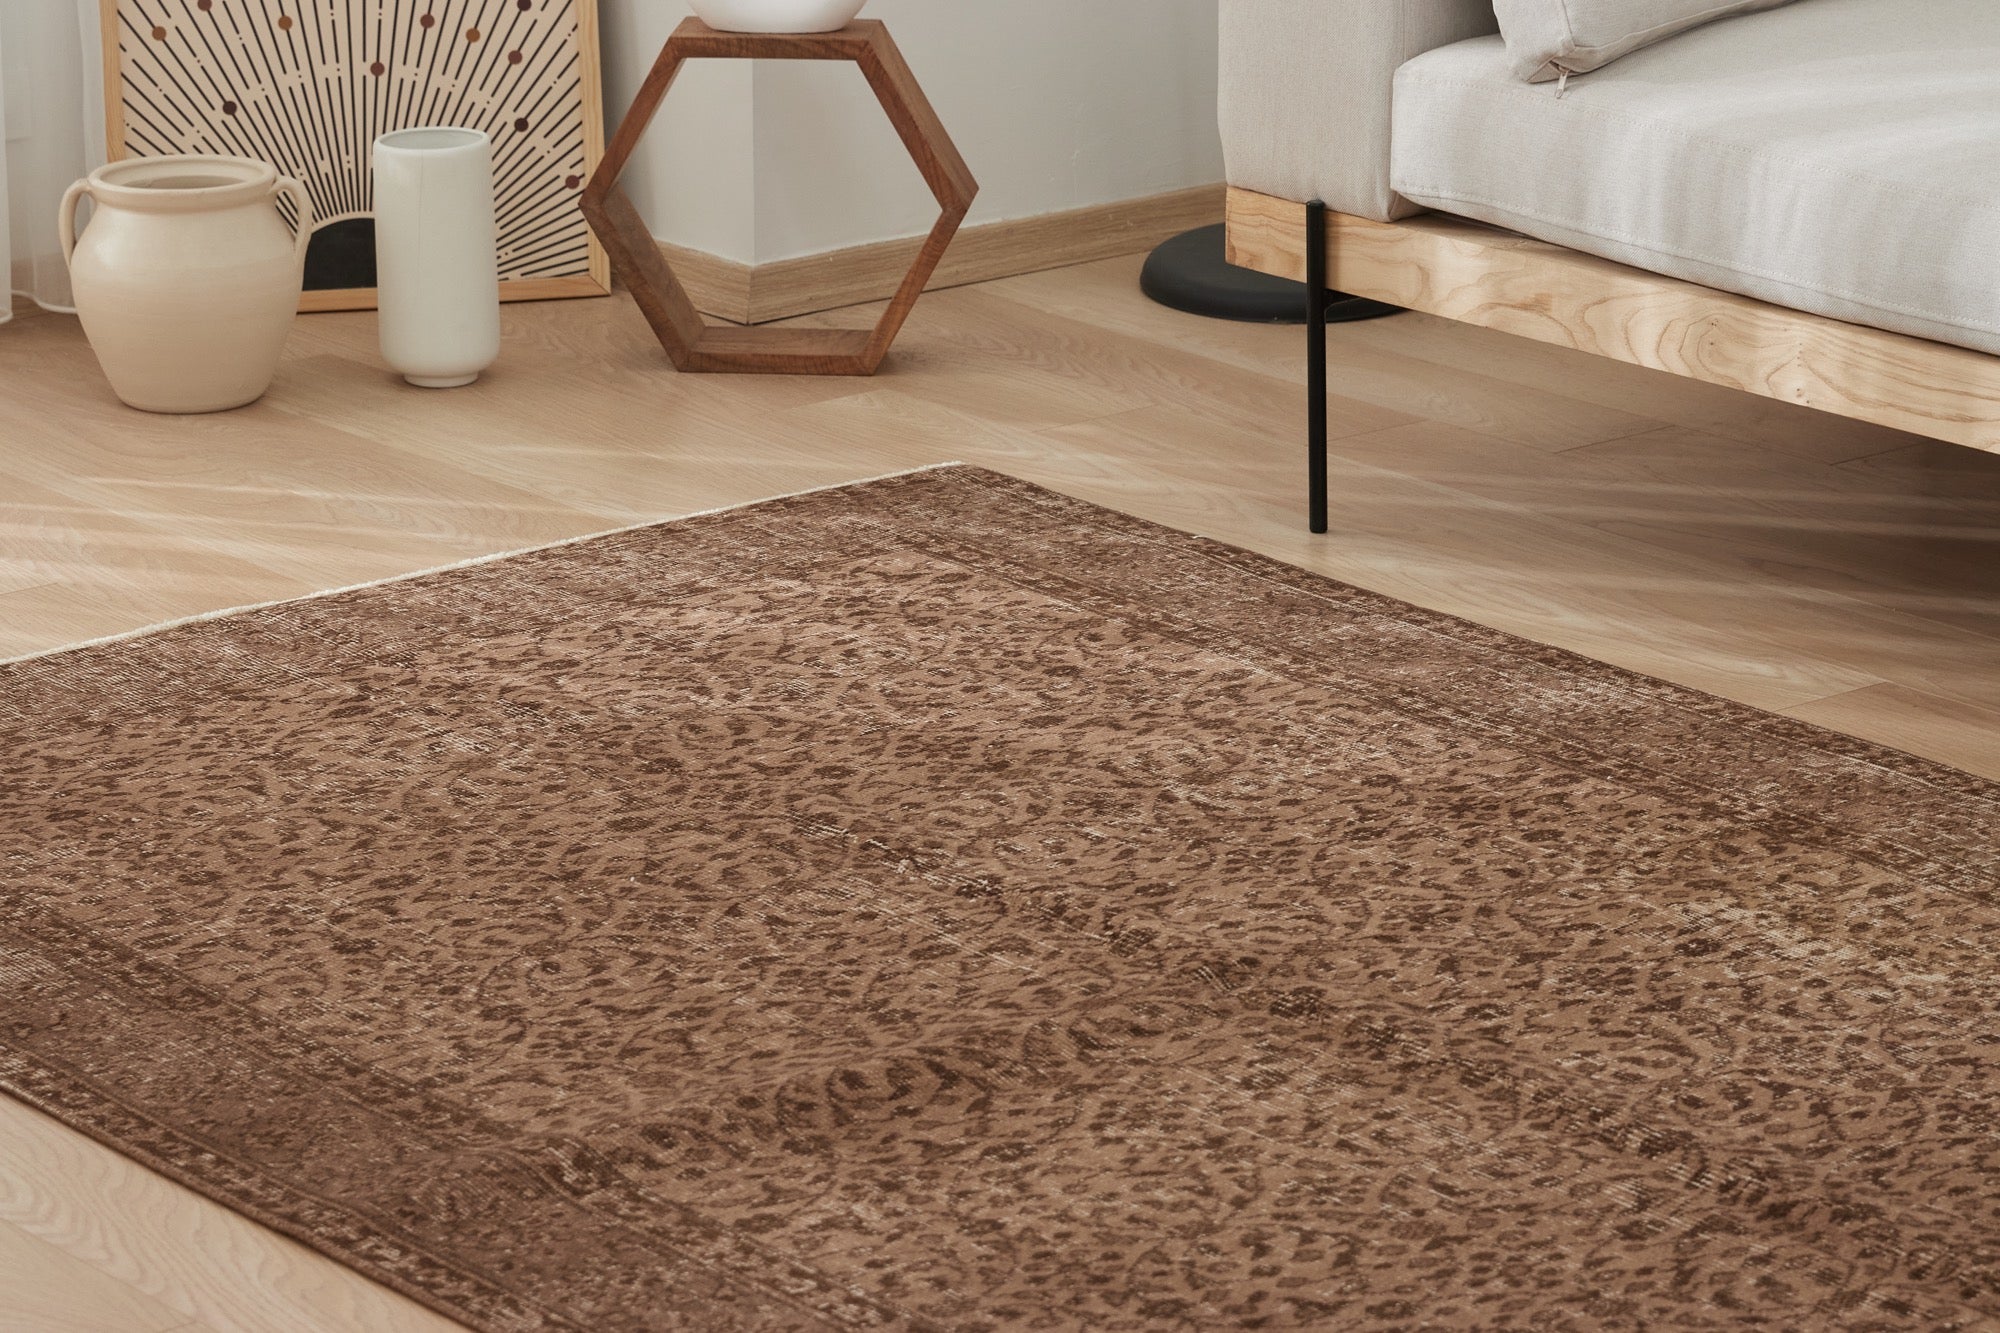 Garnetah | Unique Turkish Rug with Timeless Appeal | Kuden Rugs